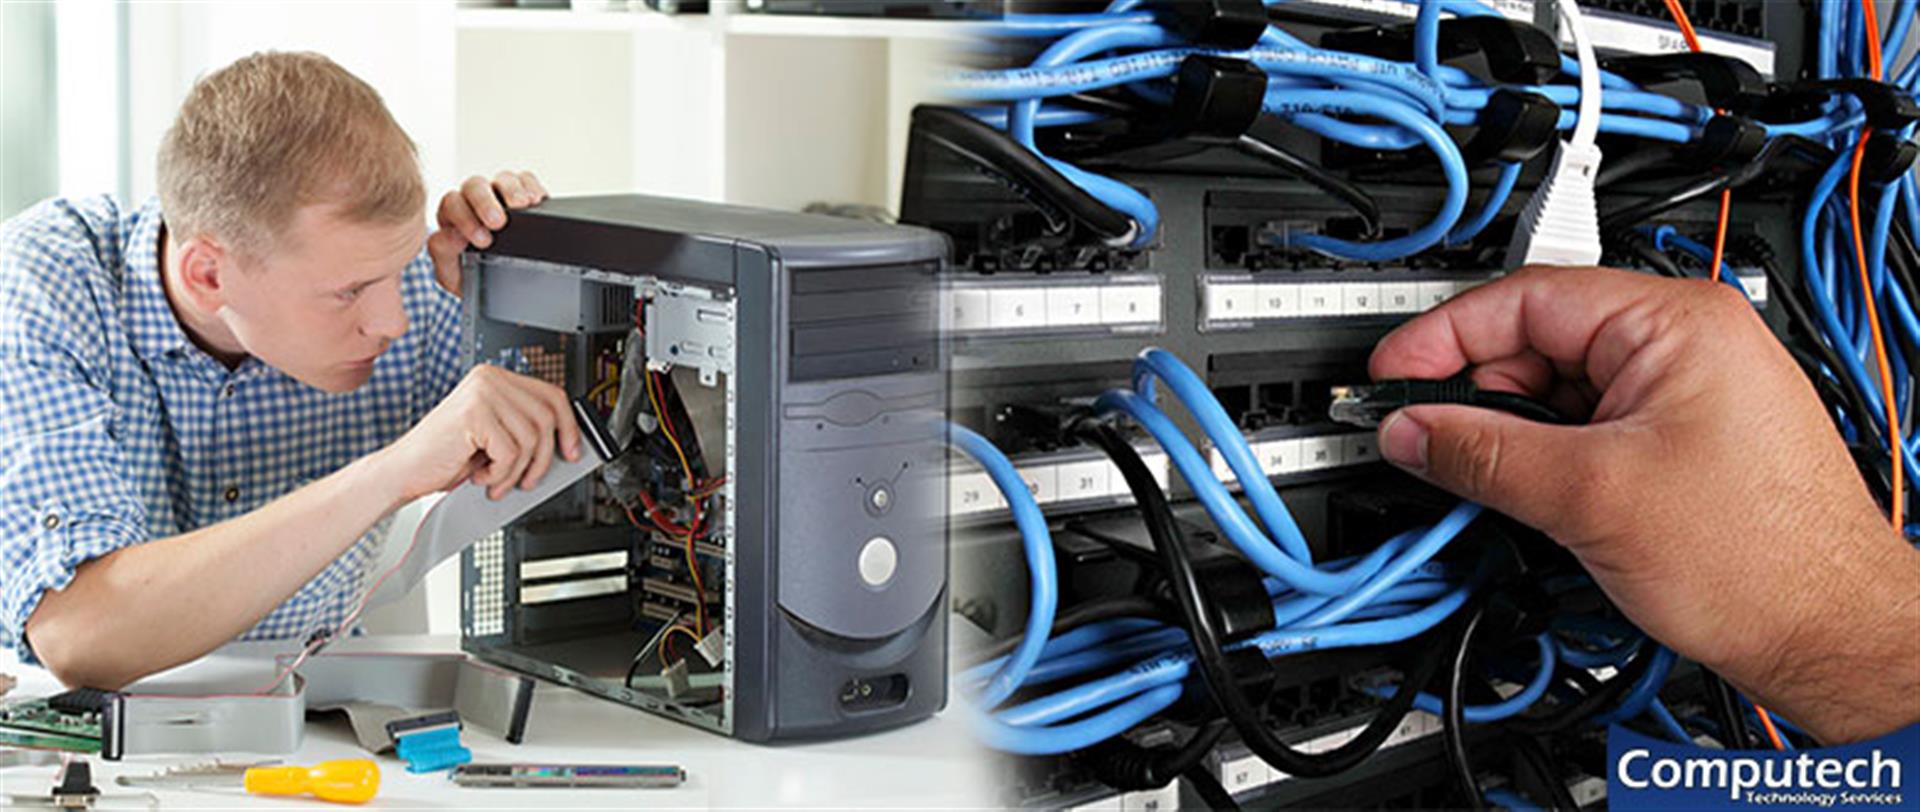 Carrollton Georgia On-Site PC & Printer Repairs, Networking, Voice & Data Cabling Solutions